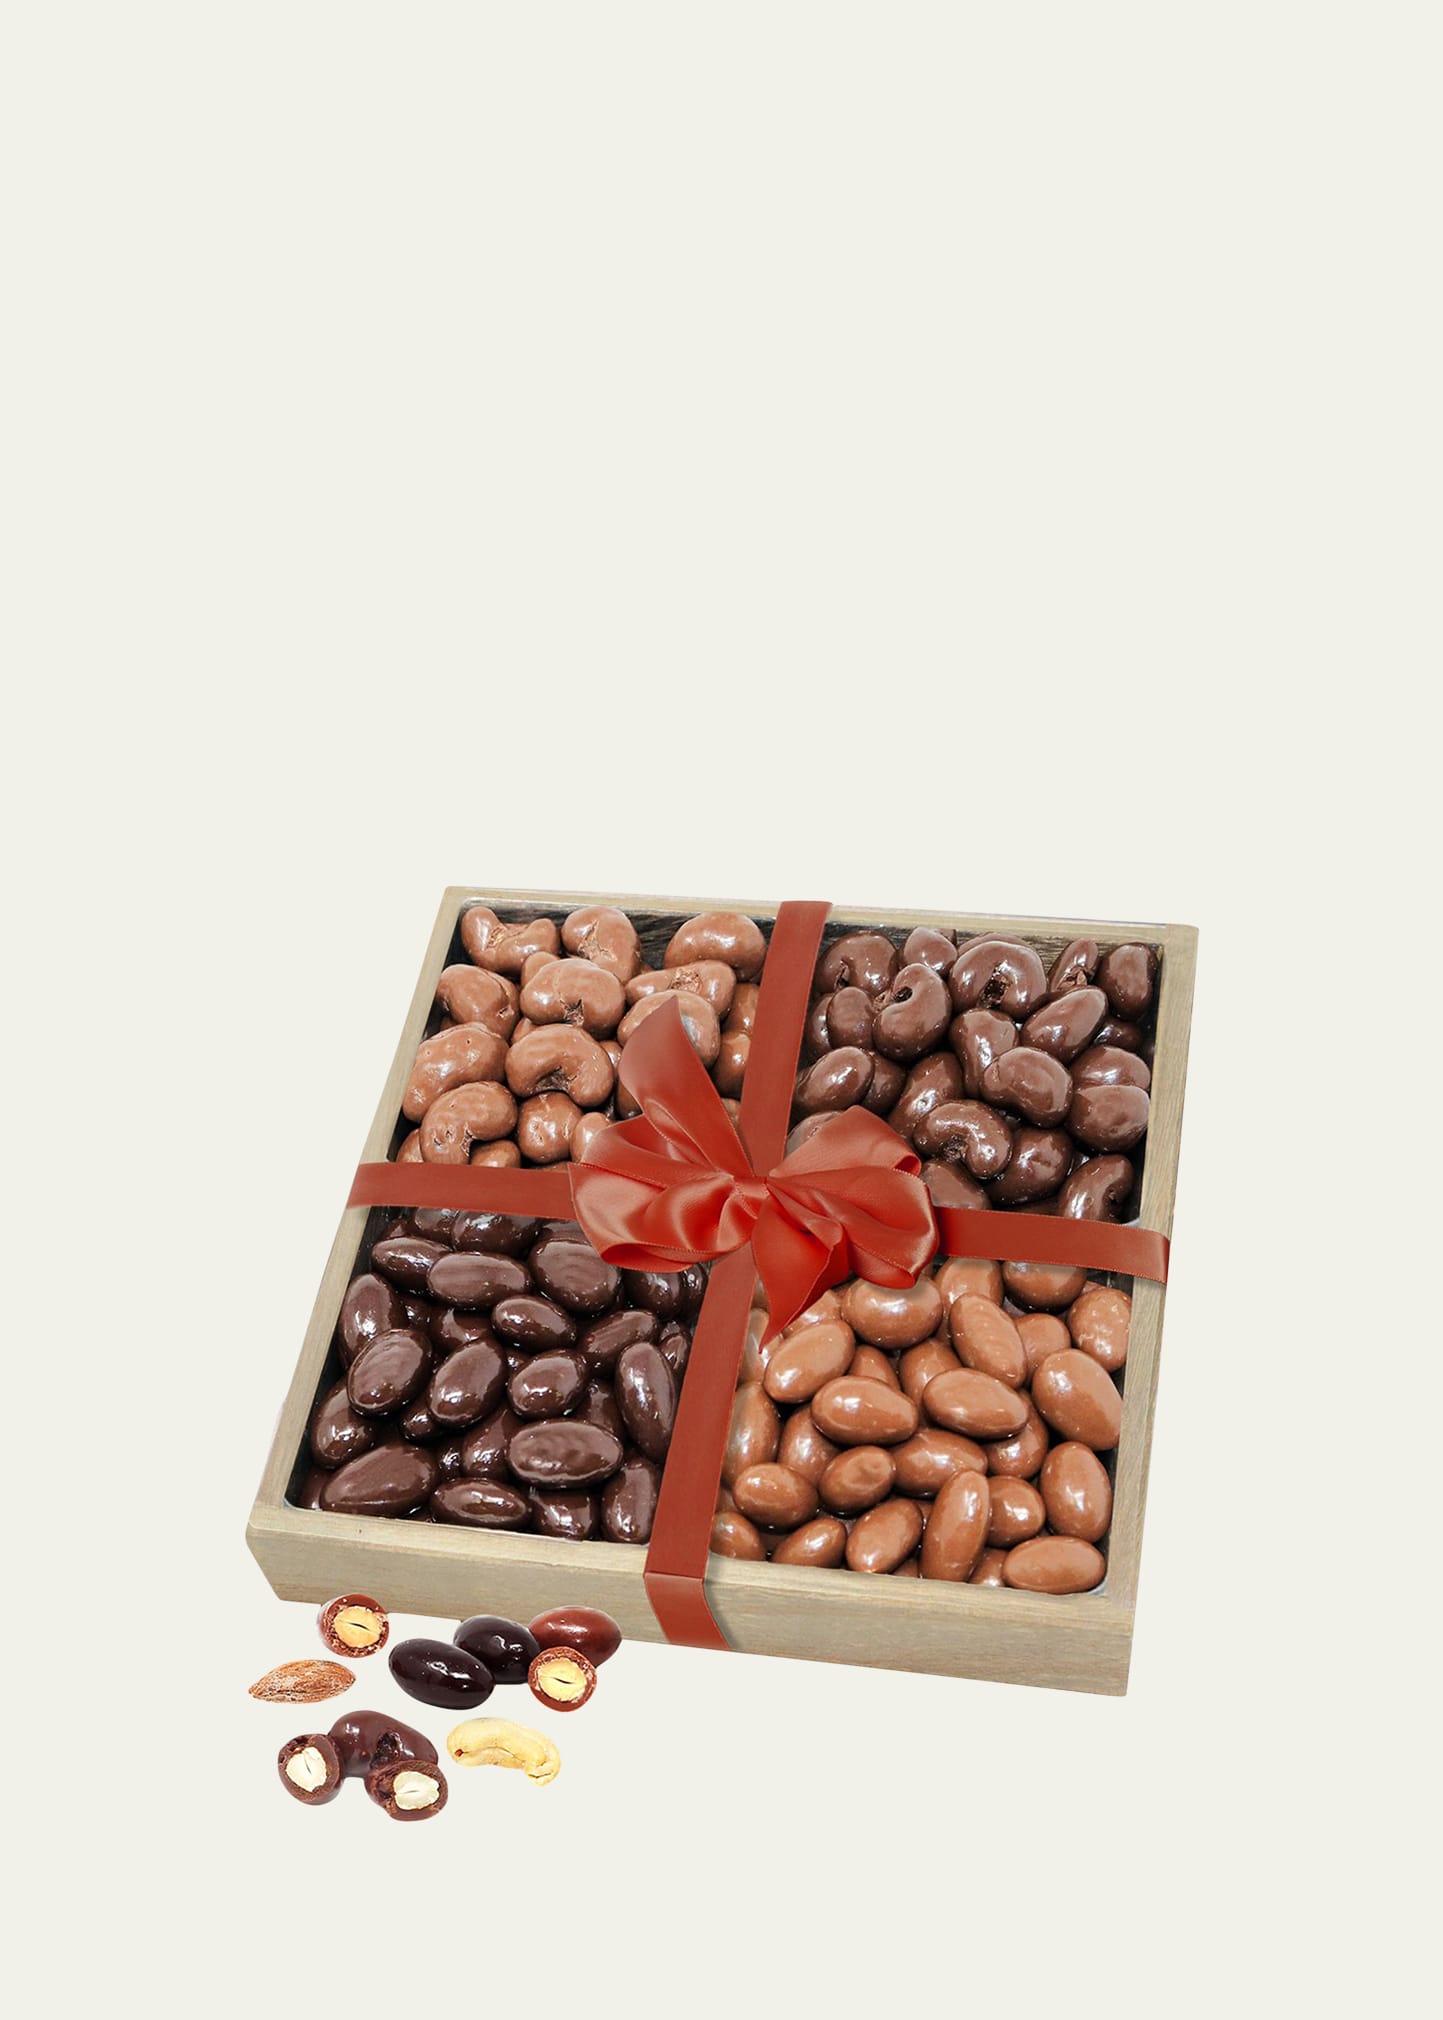 Belgian Chocolate Covered Almond and Cashew Tray